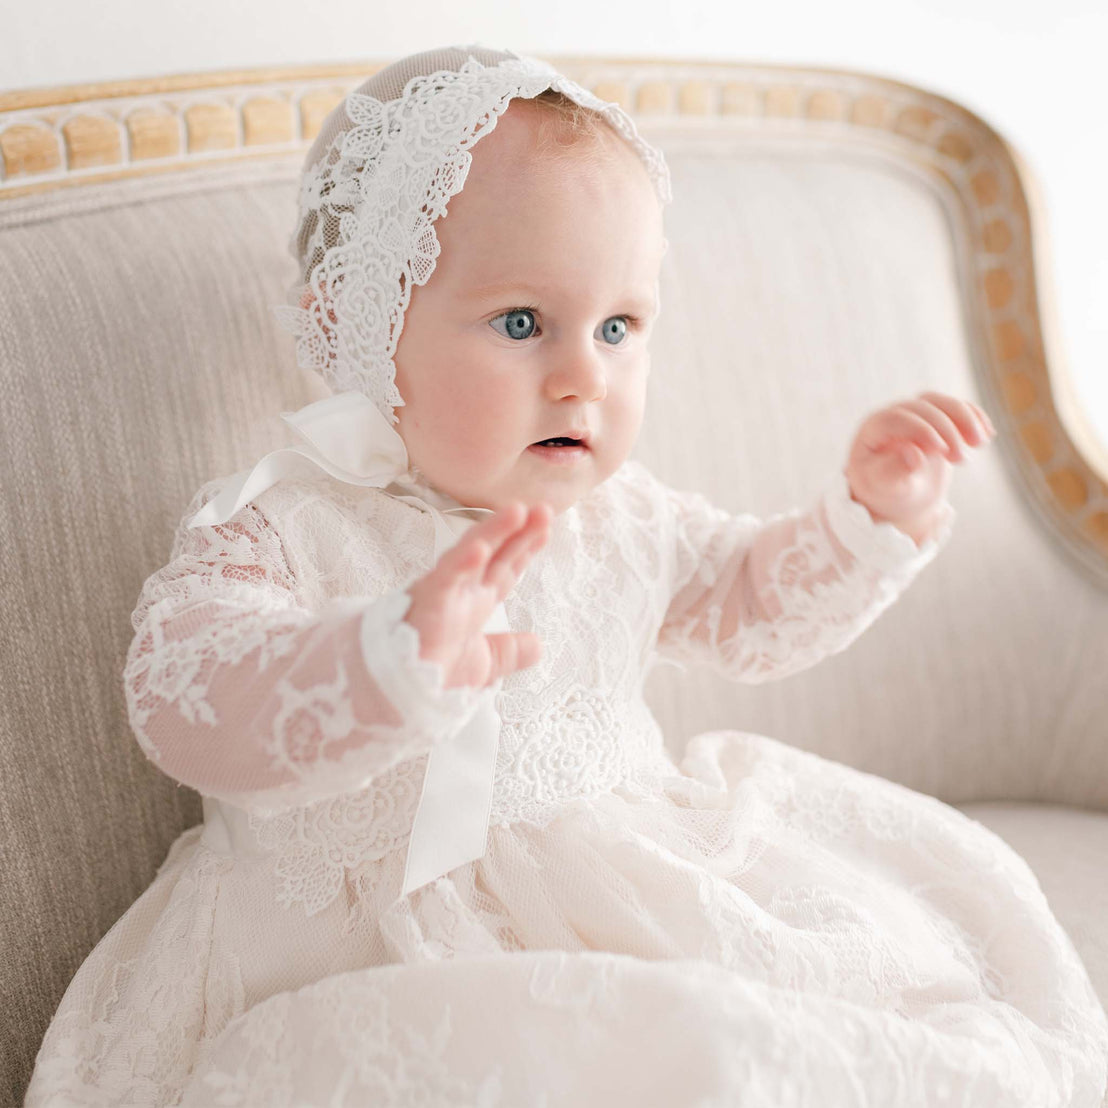 A baby with wide blue eyes wearing a Juliette Christening Gown & Bonnet sits on an upscale couch, looking curiously off to the side.